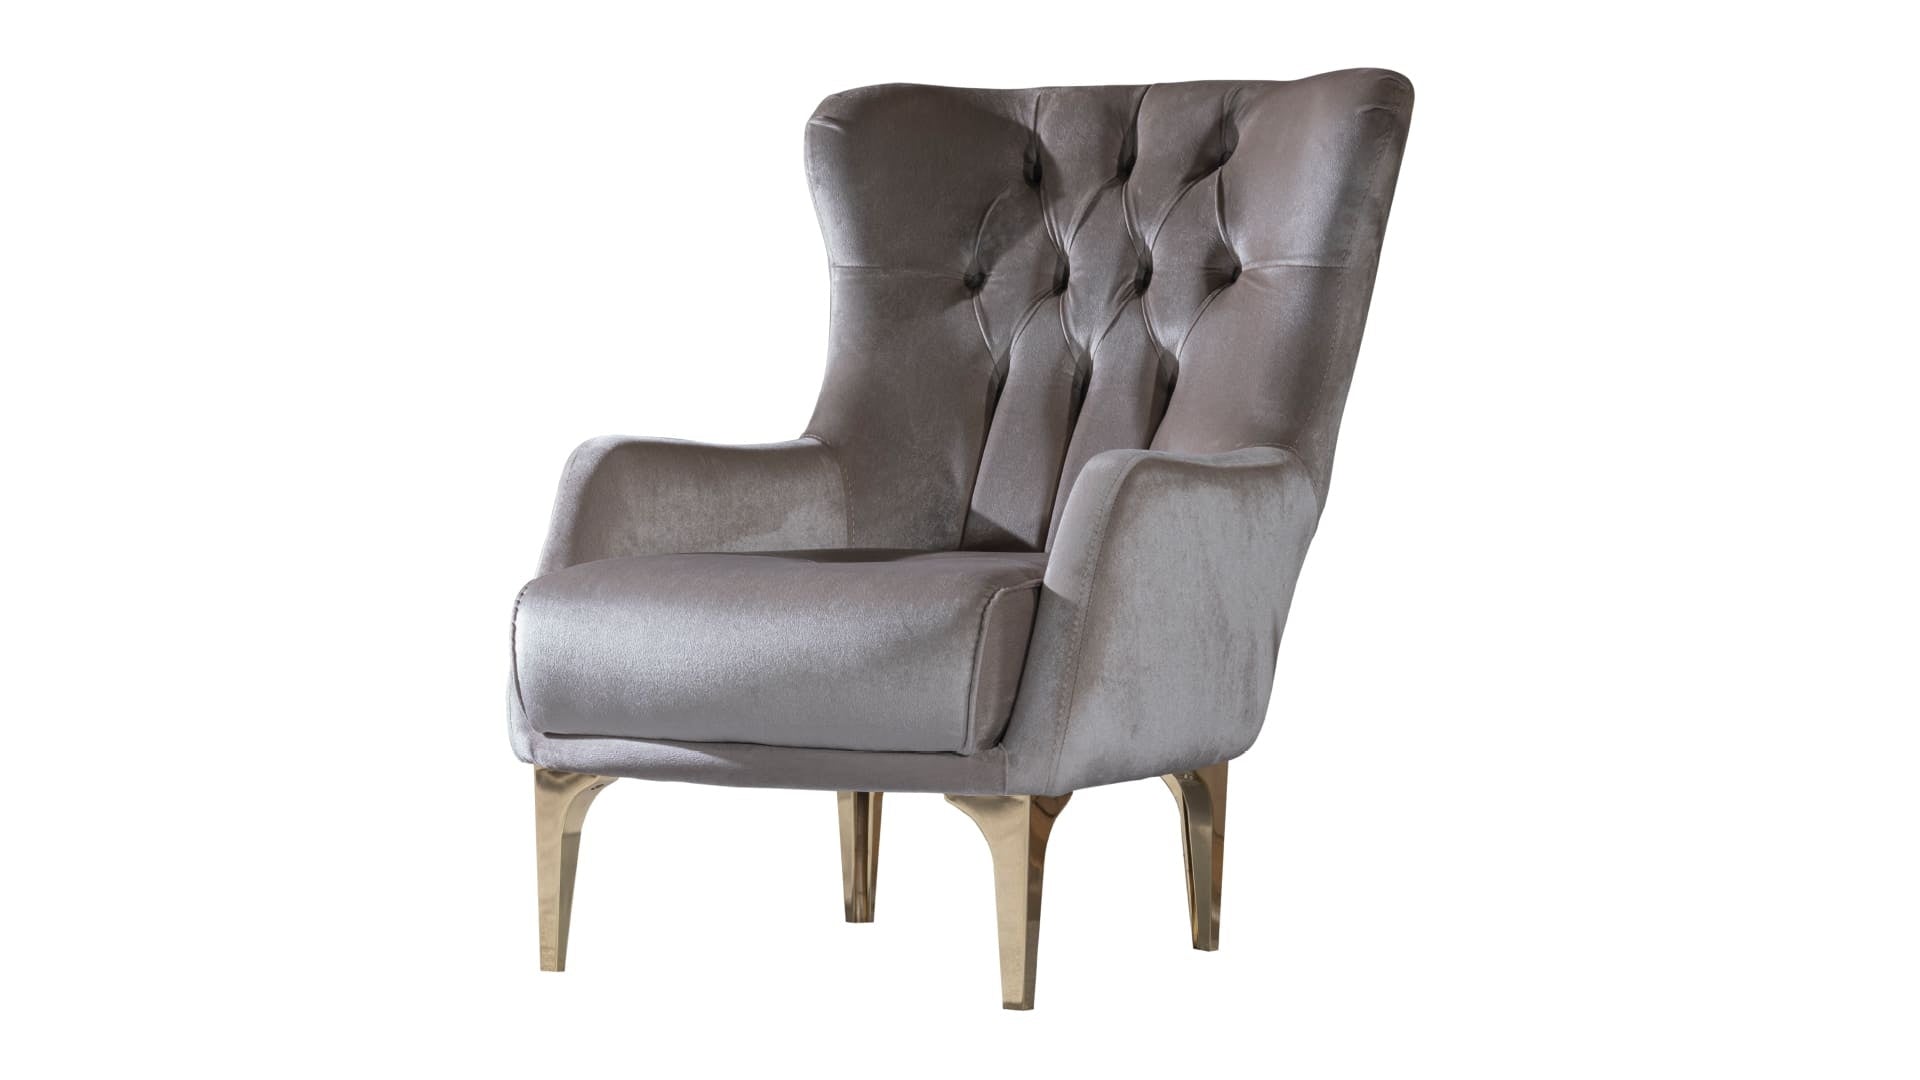 Lust Modern Style Chair in Taupe taupe-modern-upholstered-wood